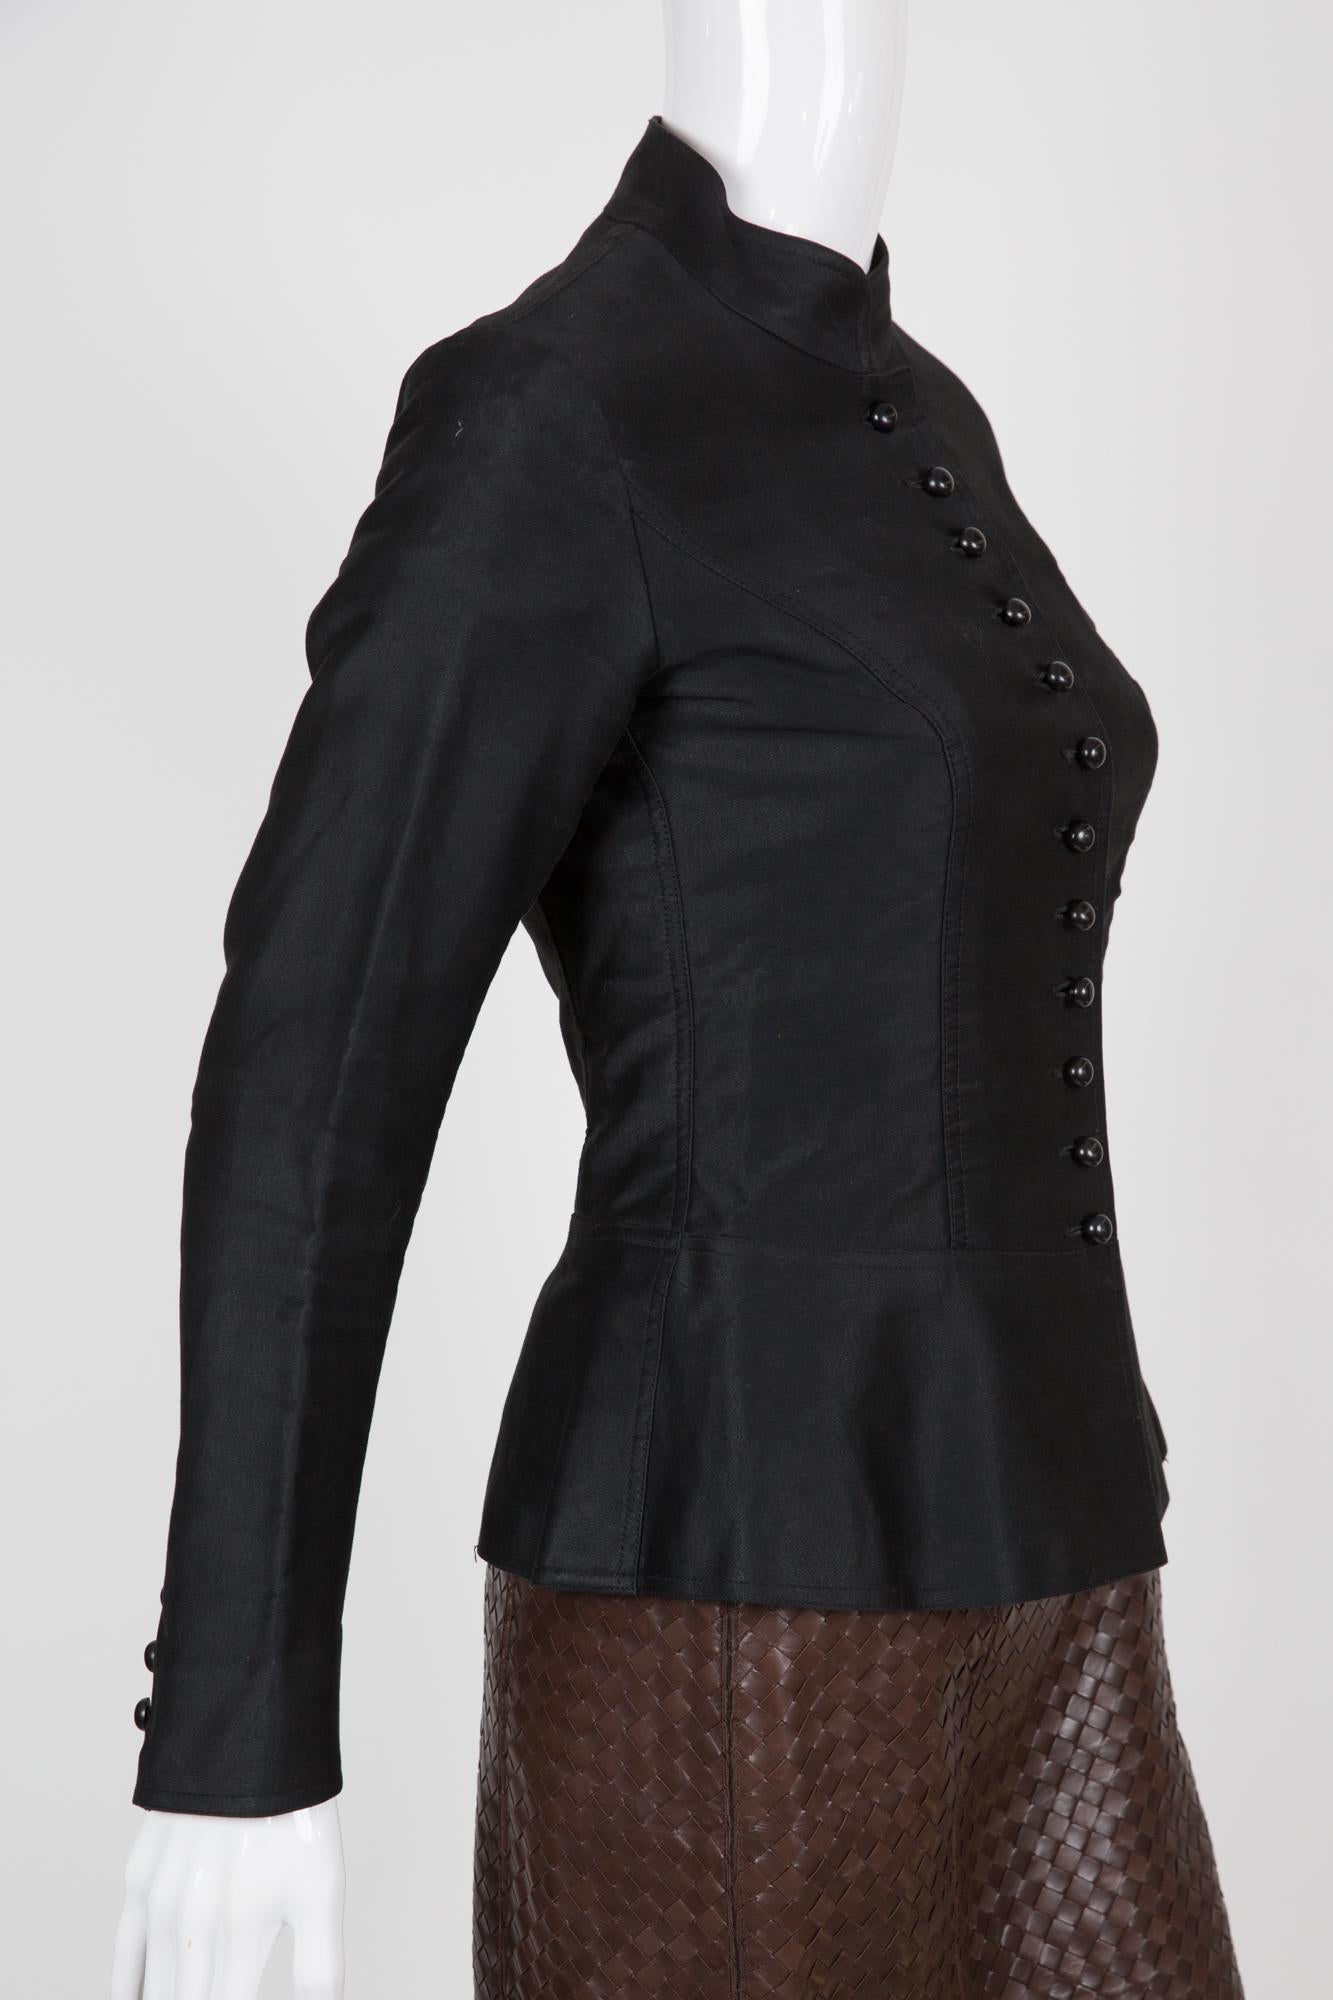 Rare, Yves Saint Laurent YSL black  jacket featuring a Mao collar, rounded buttons, a bottom basque and long sleeves with buttons at cuffs. 
Circa 1970s Spring/Summer
Composition: 100% cotton
Estimated size 36fr/ US4/ UK8 and Estimated size 38fr/US6